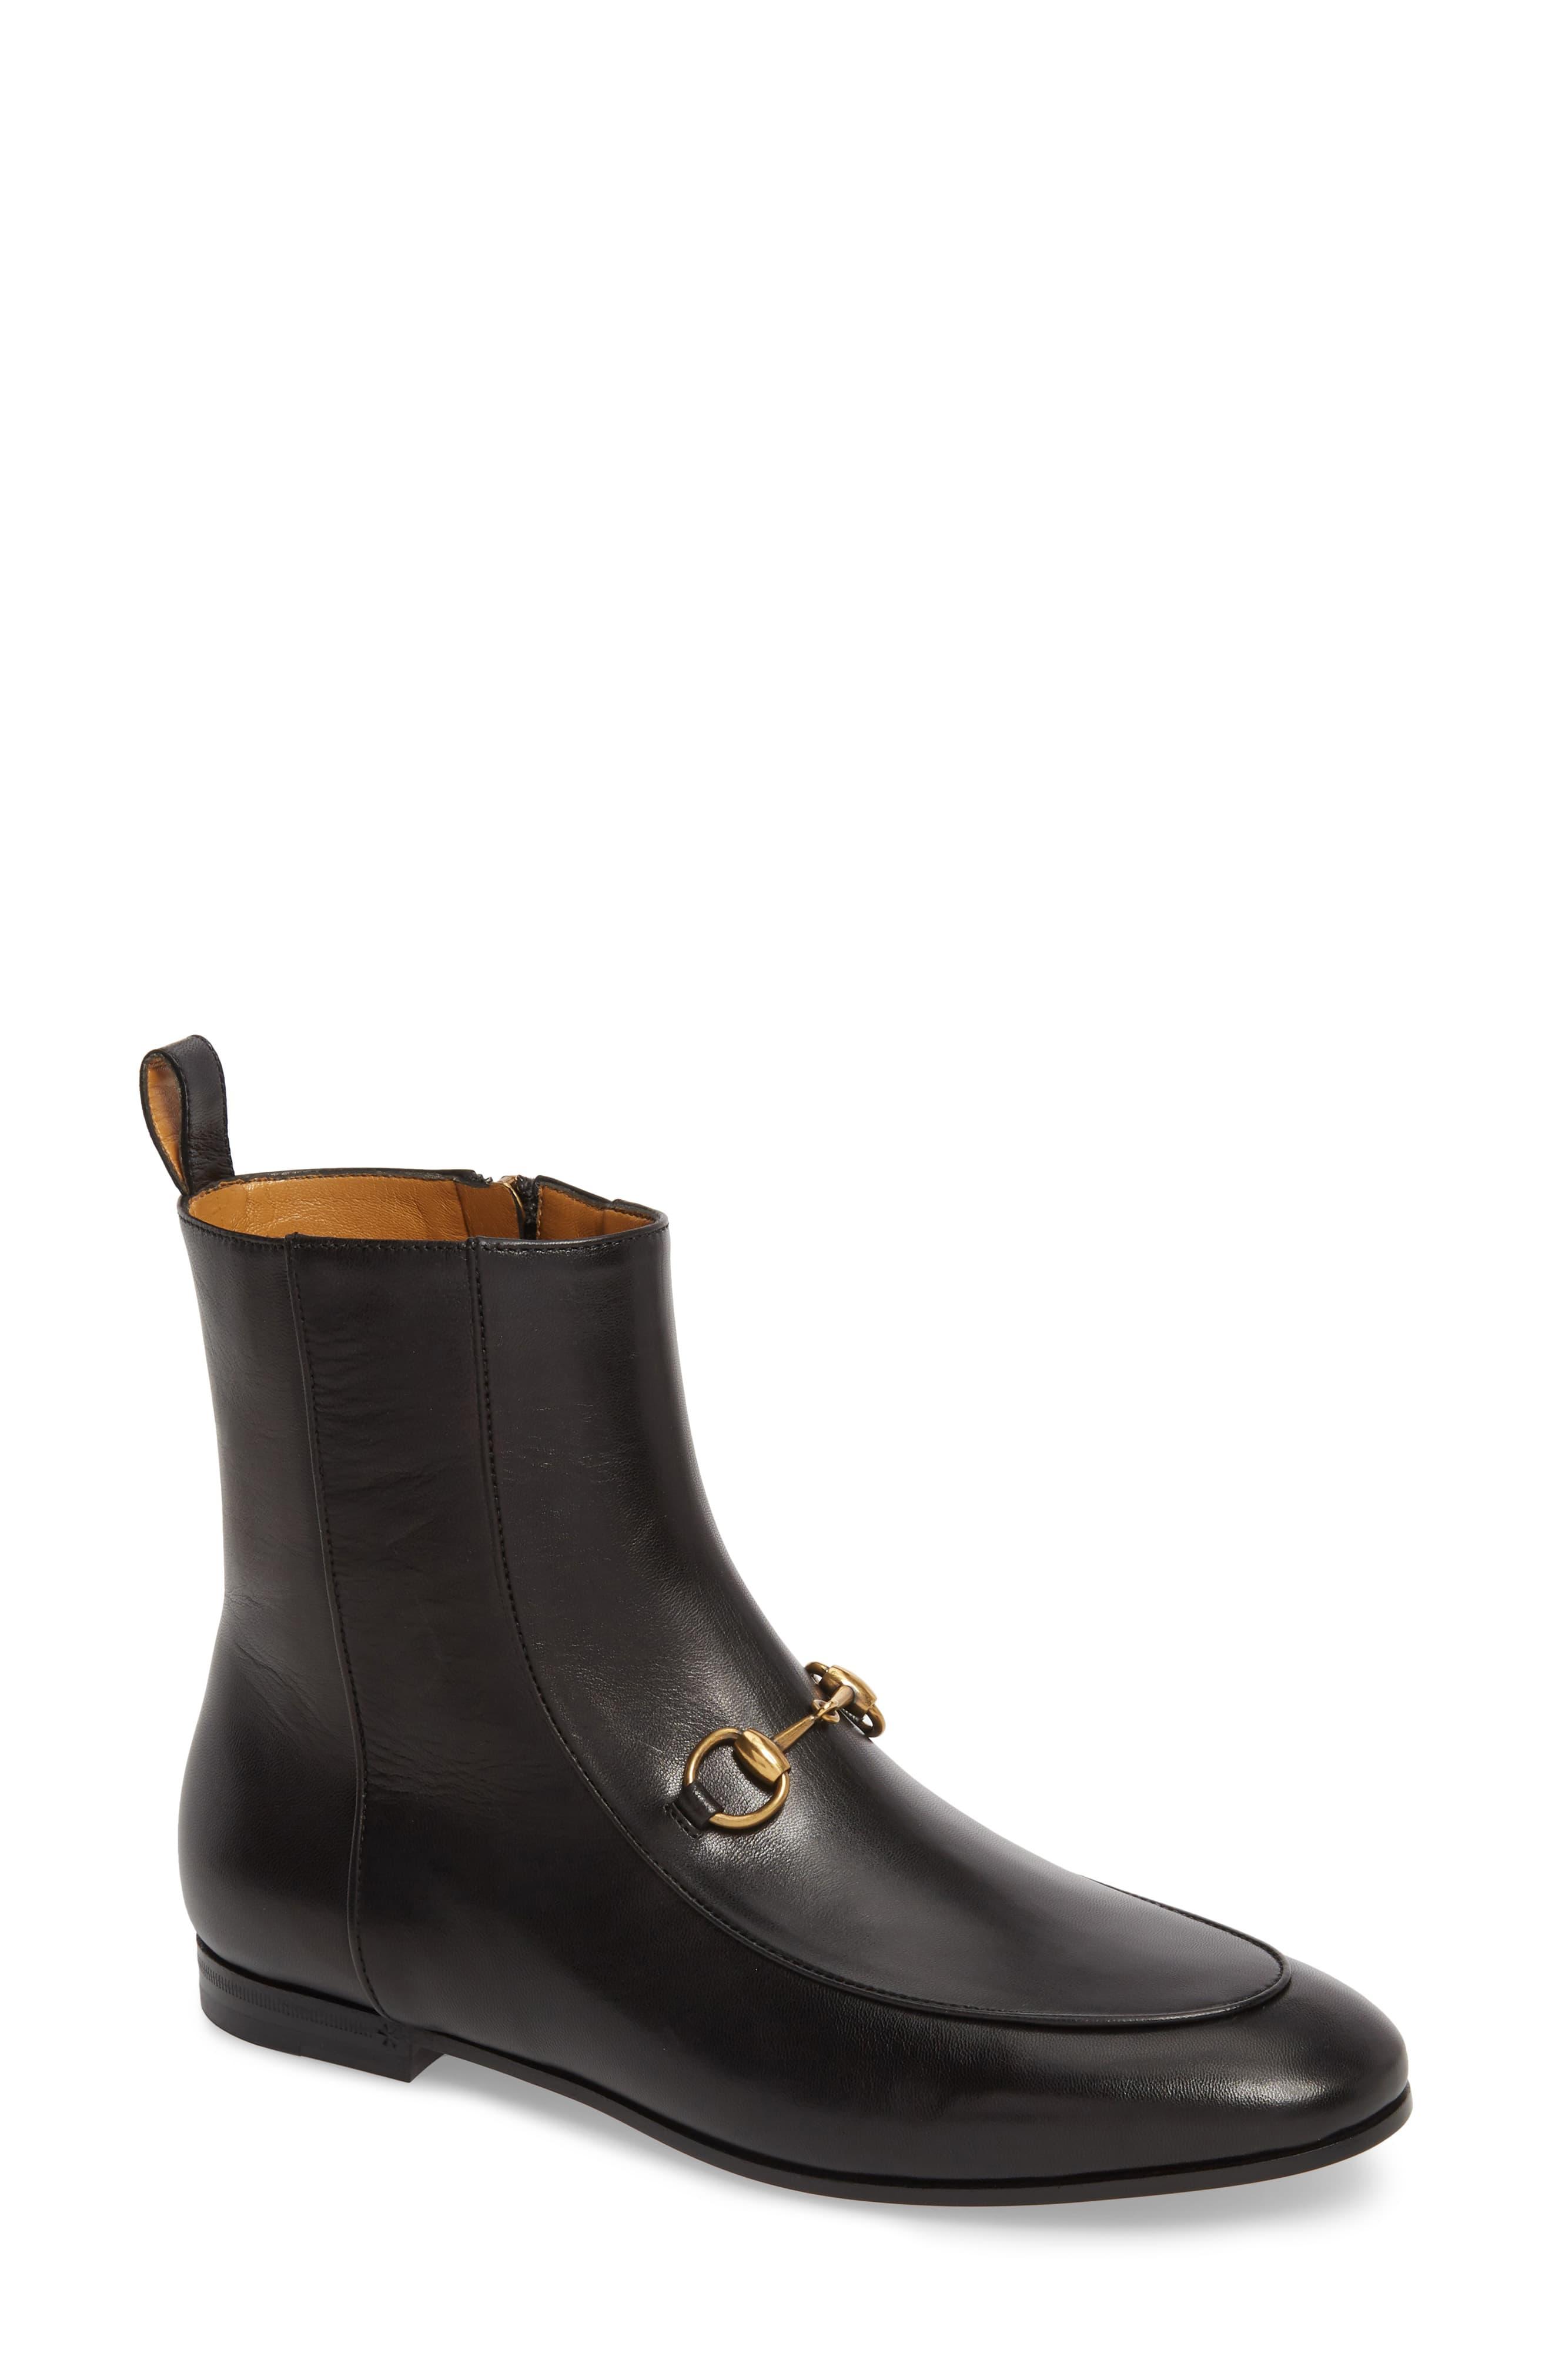 Gucci Jordaan Leather Ankle Boot in 